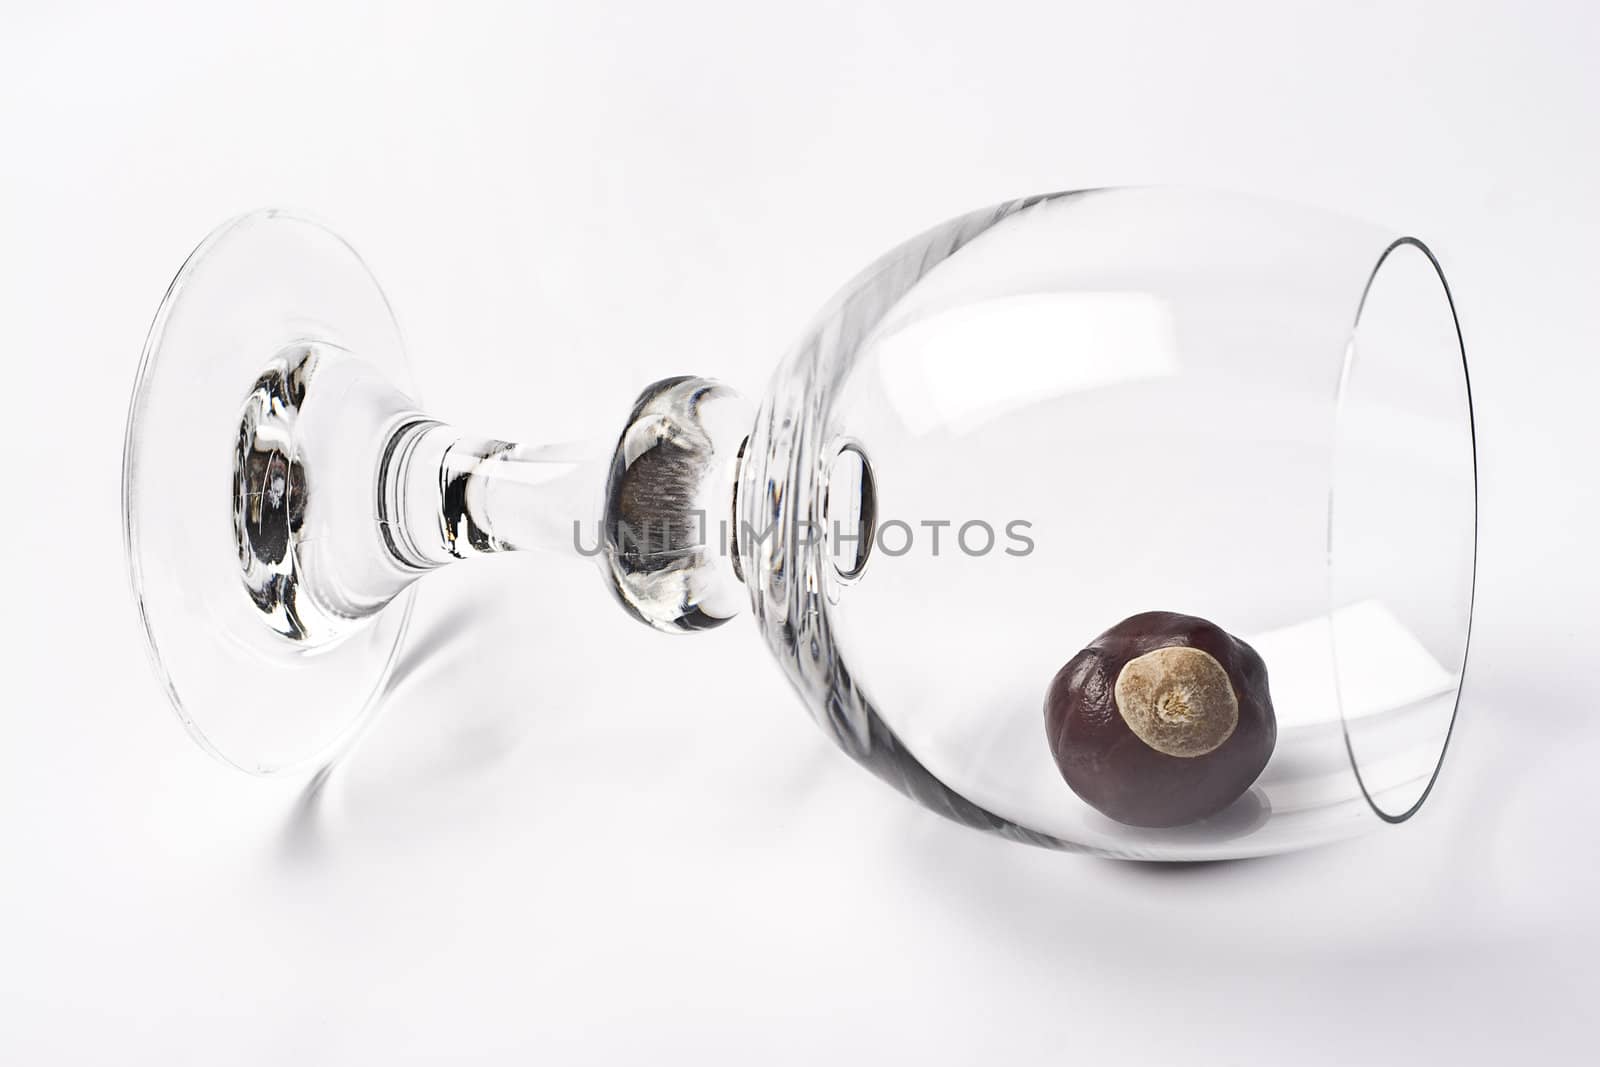 Glass of wine tipped over containing one chestnut